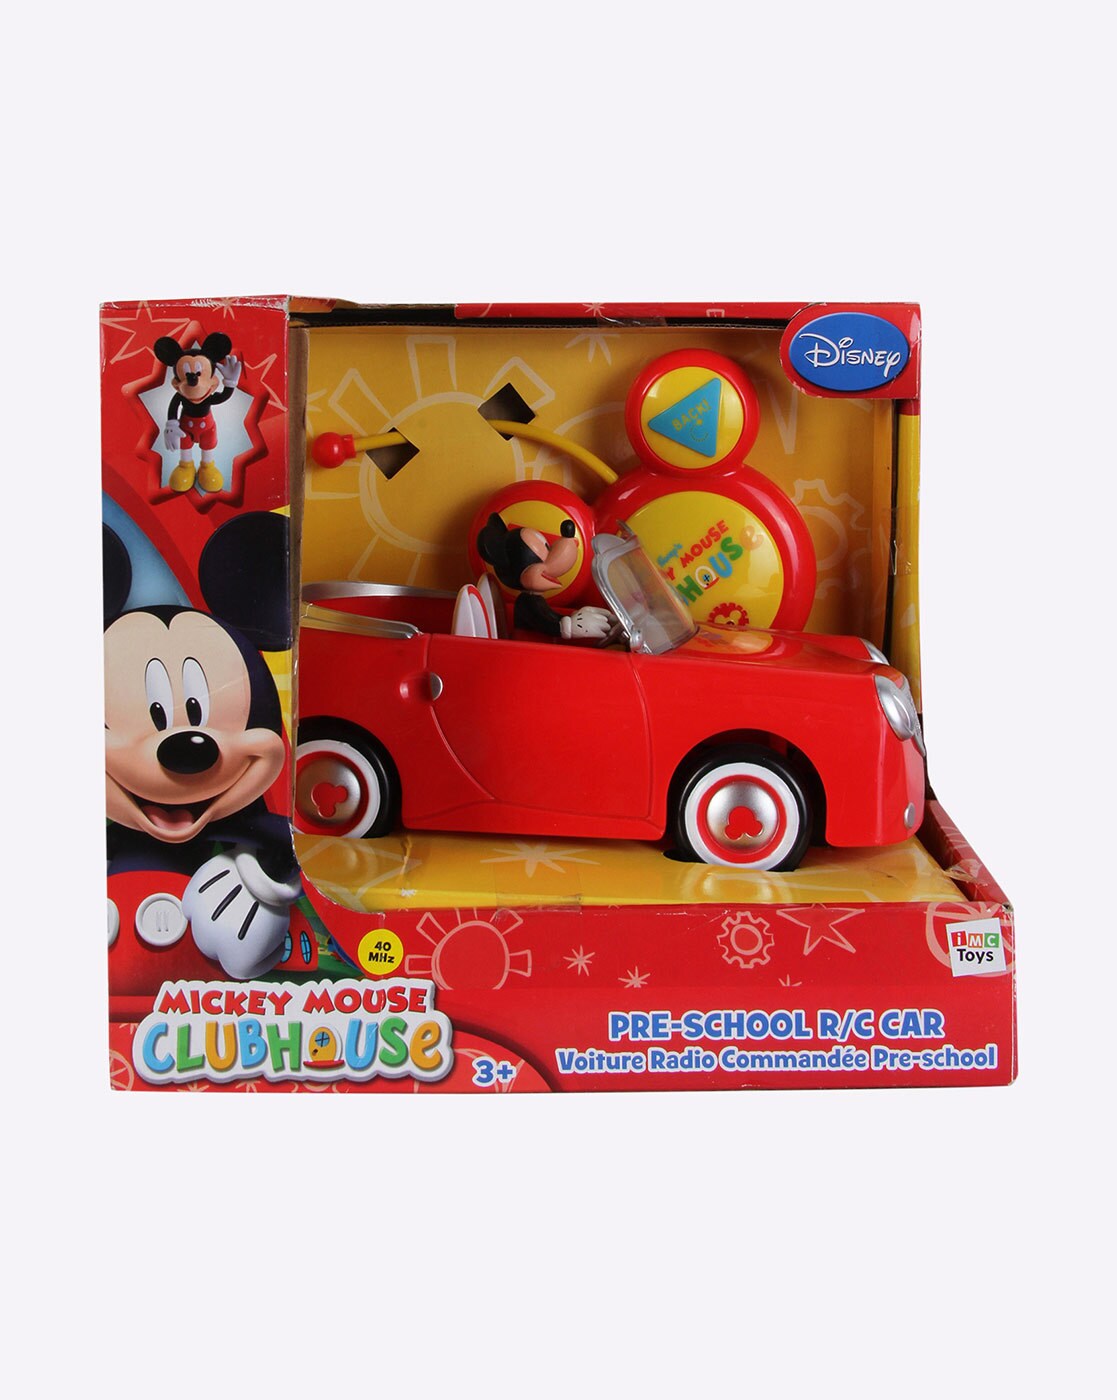 baby toy car online shopping